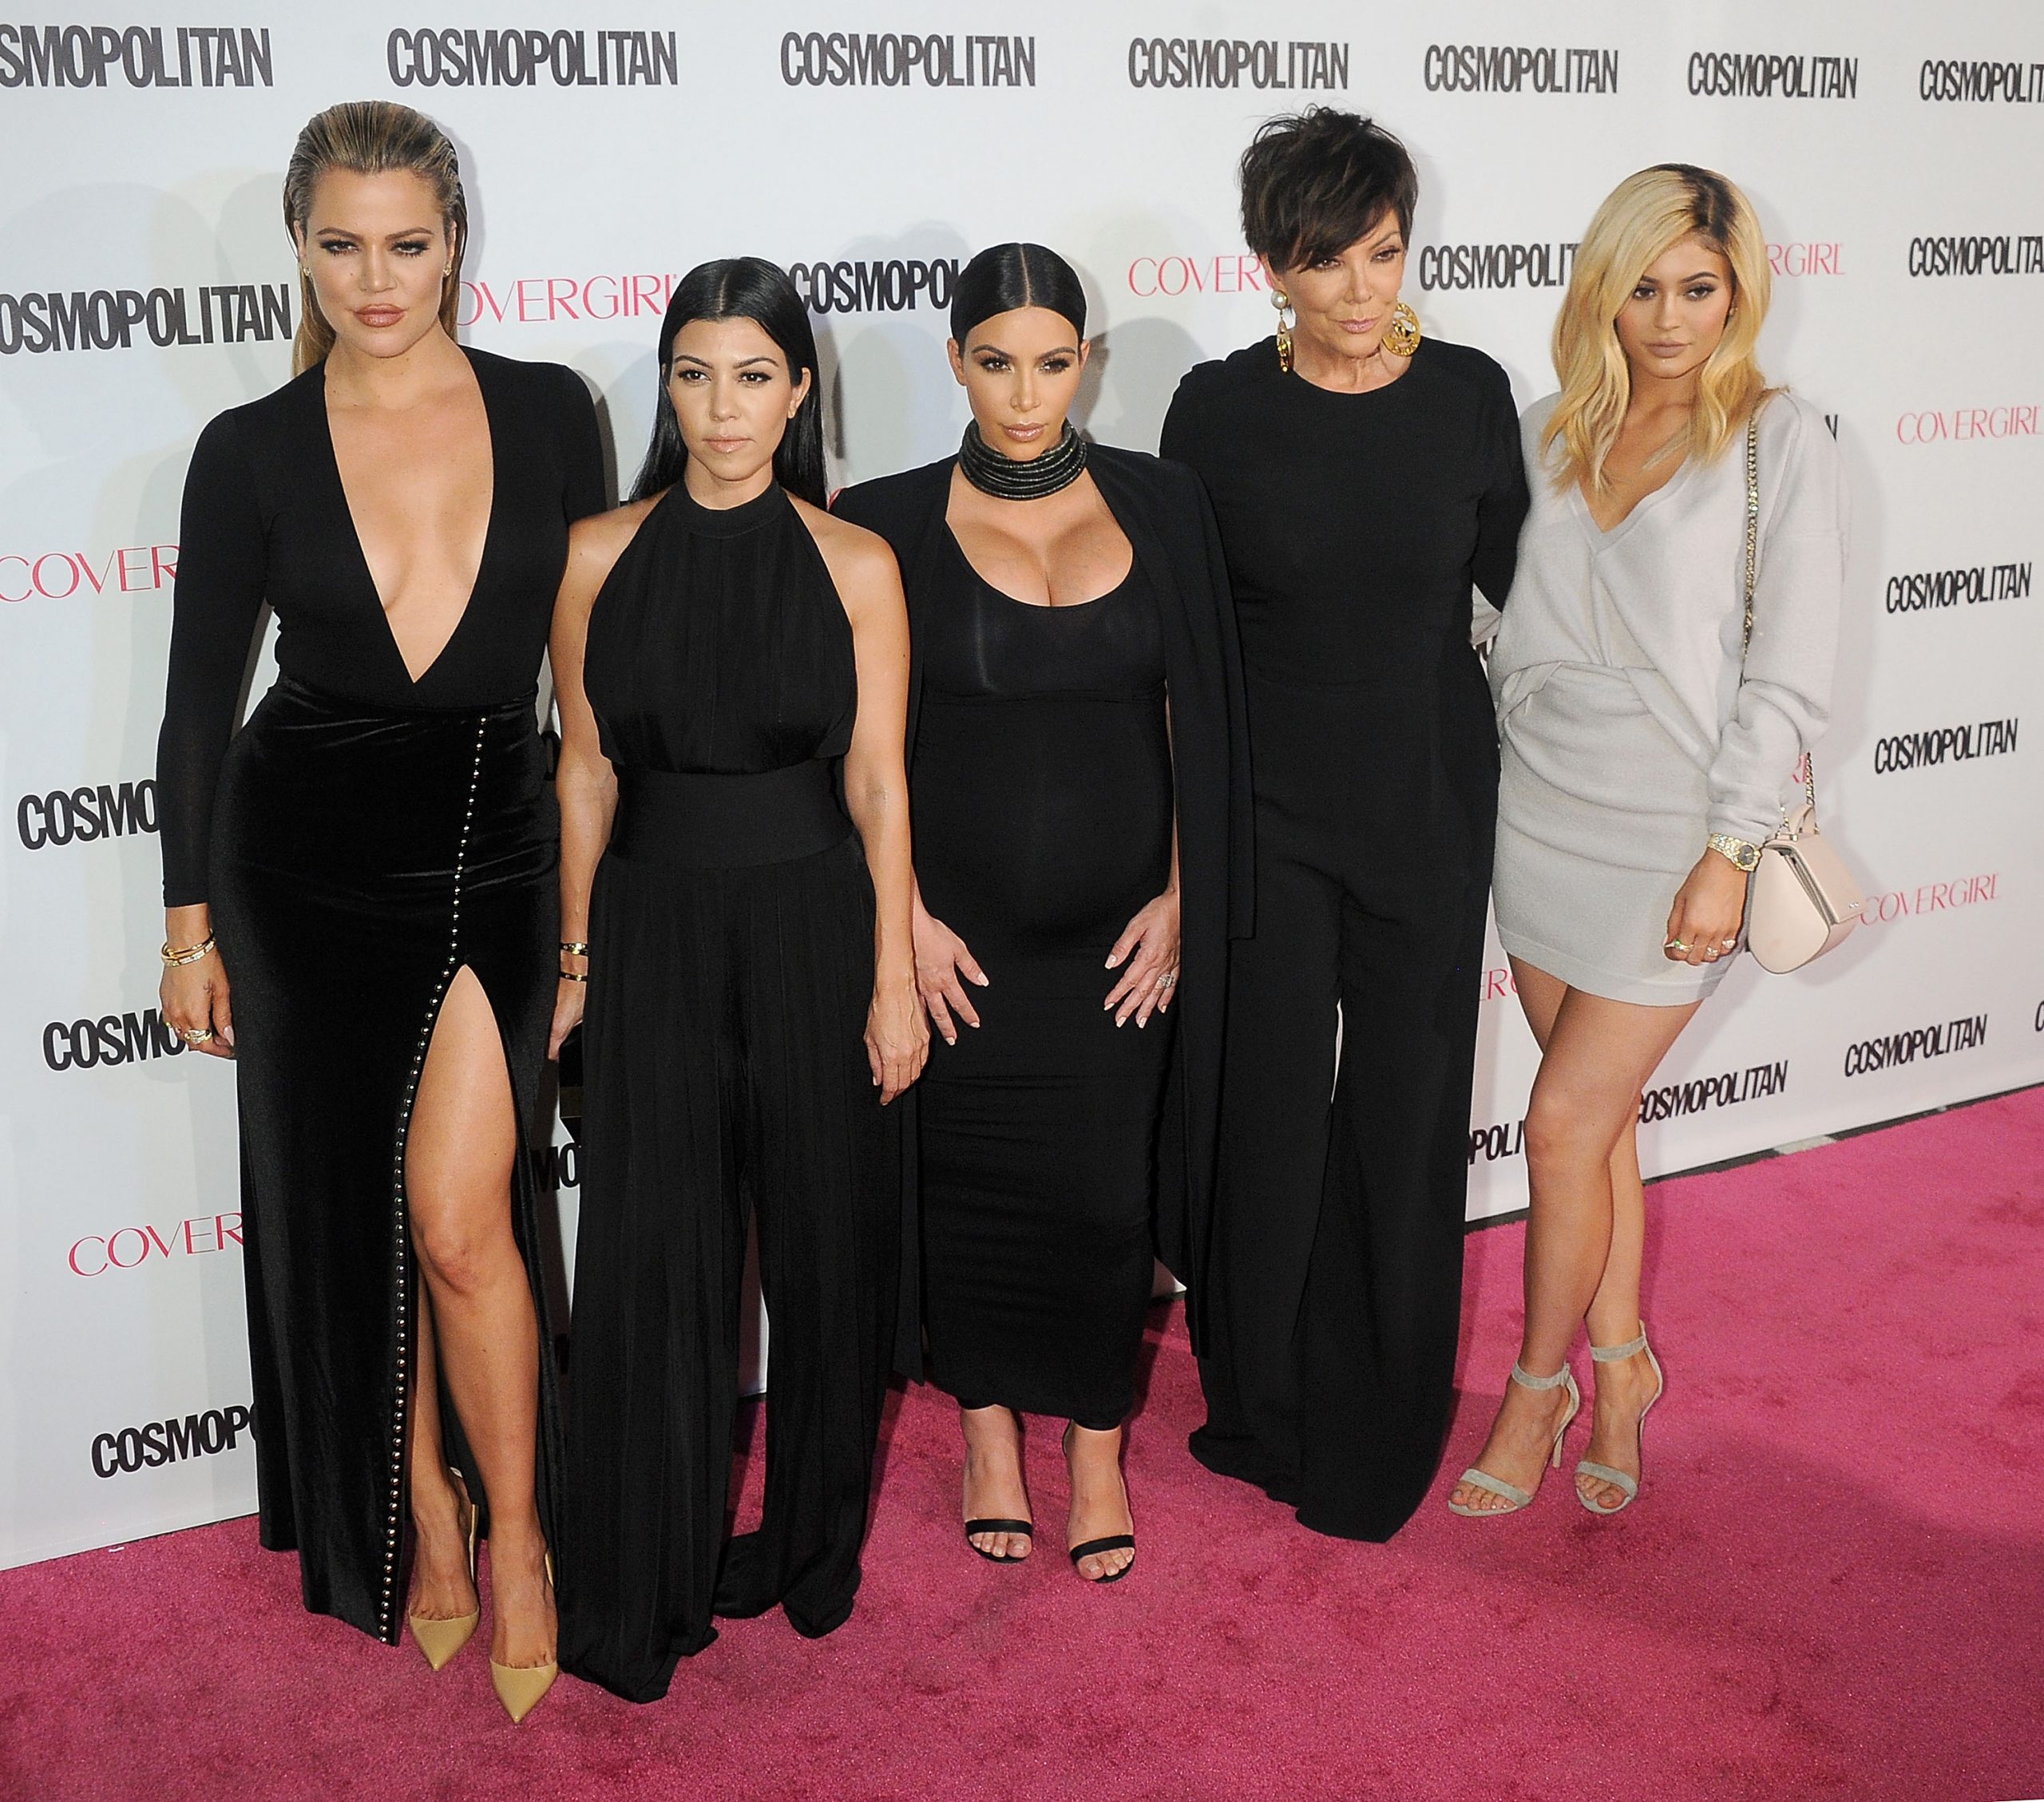 Kardashian-Jenner Closets Ranked From Least to Most Extravagant